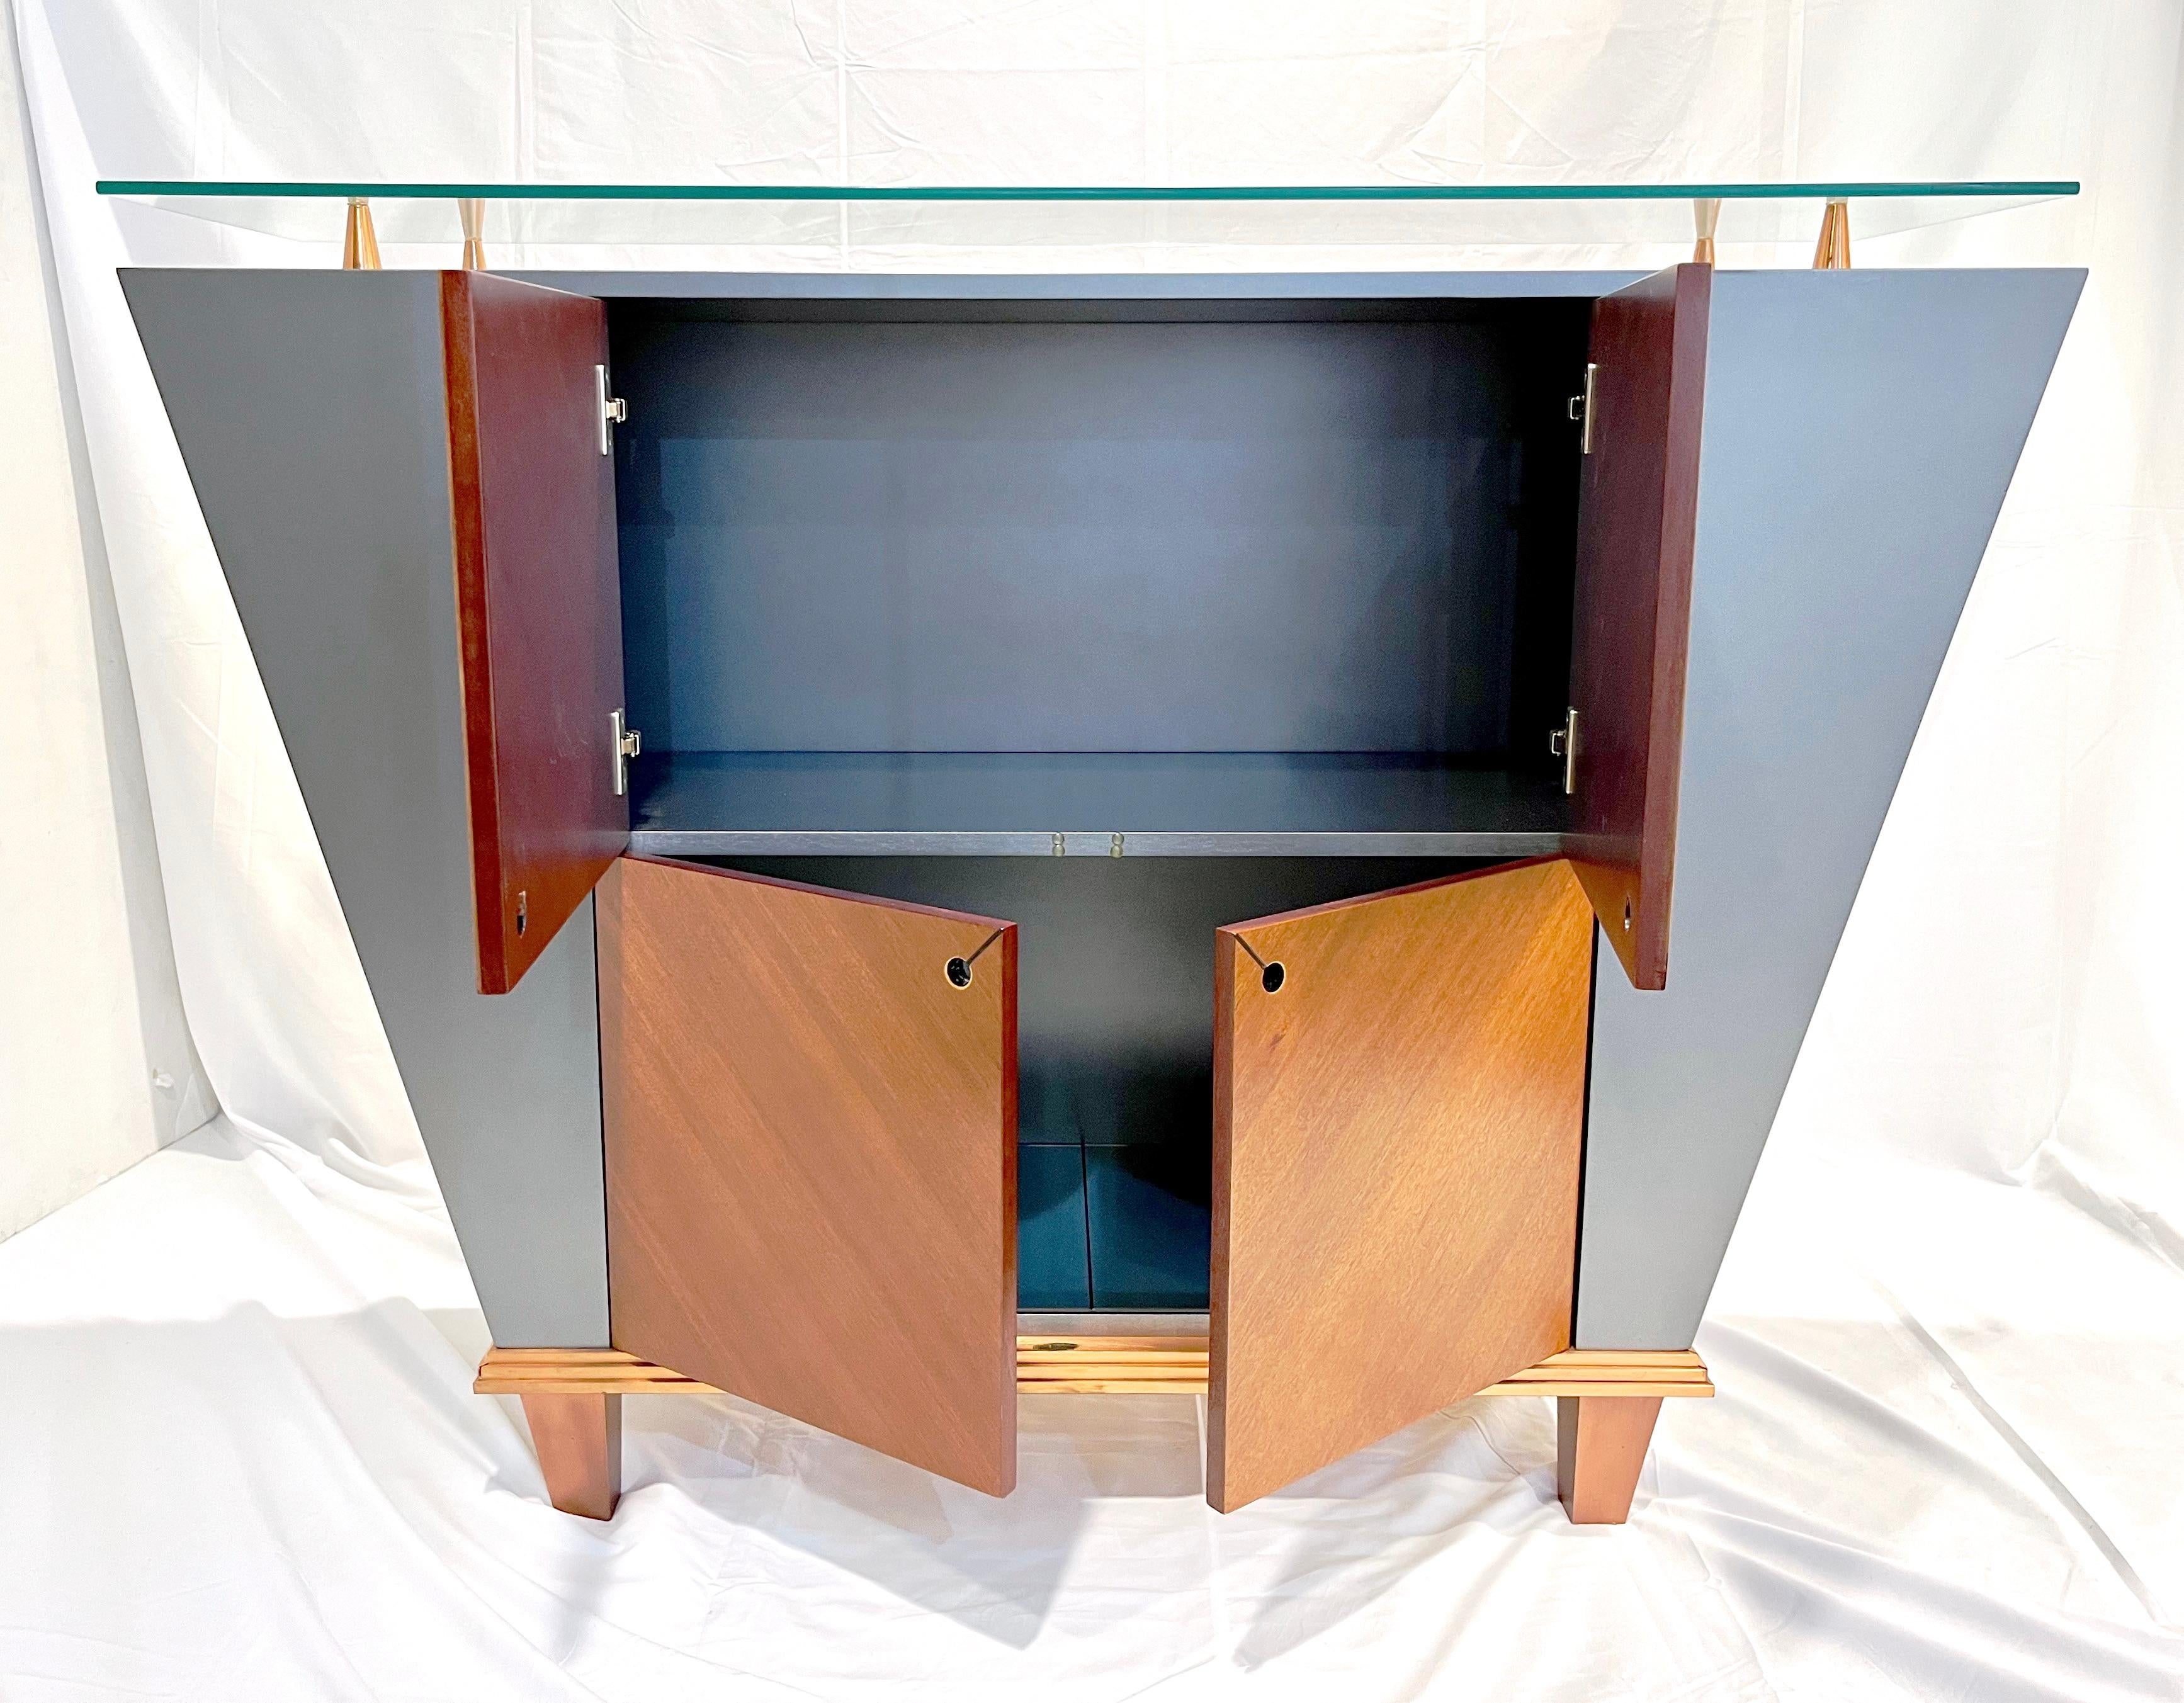 Hand-Crafted Italian Mid-Century Modern Copper & Grey Lacquer Sideboard by Pallucco For Sale